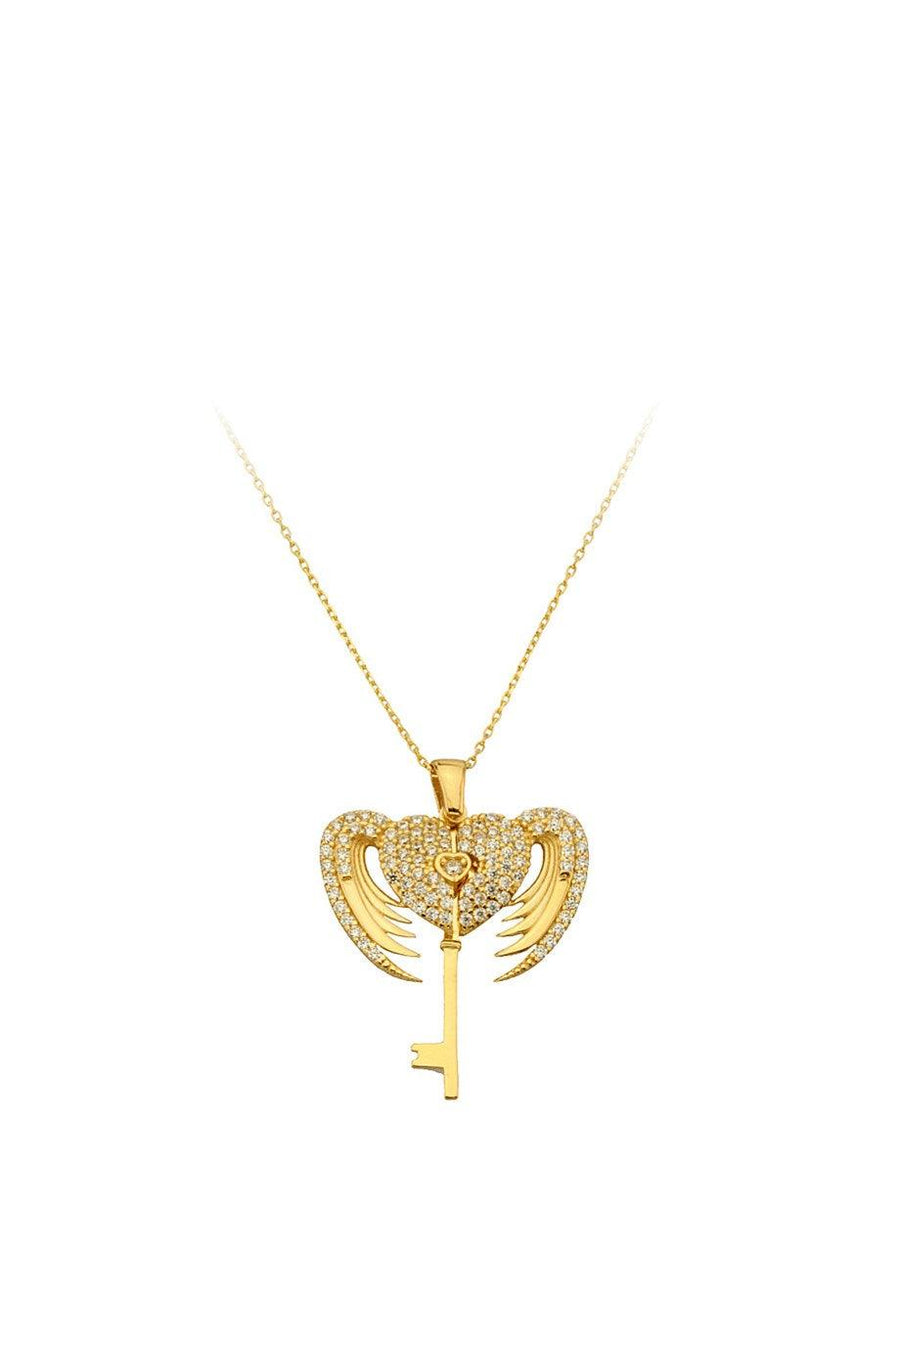 Gold Winged Heart Key Necklace